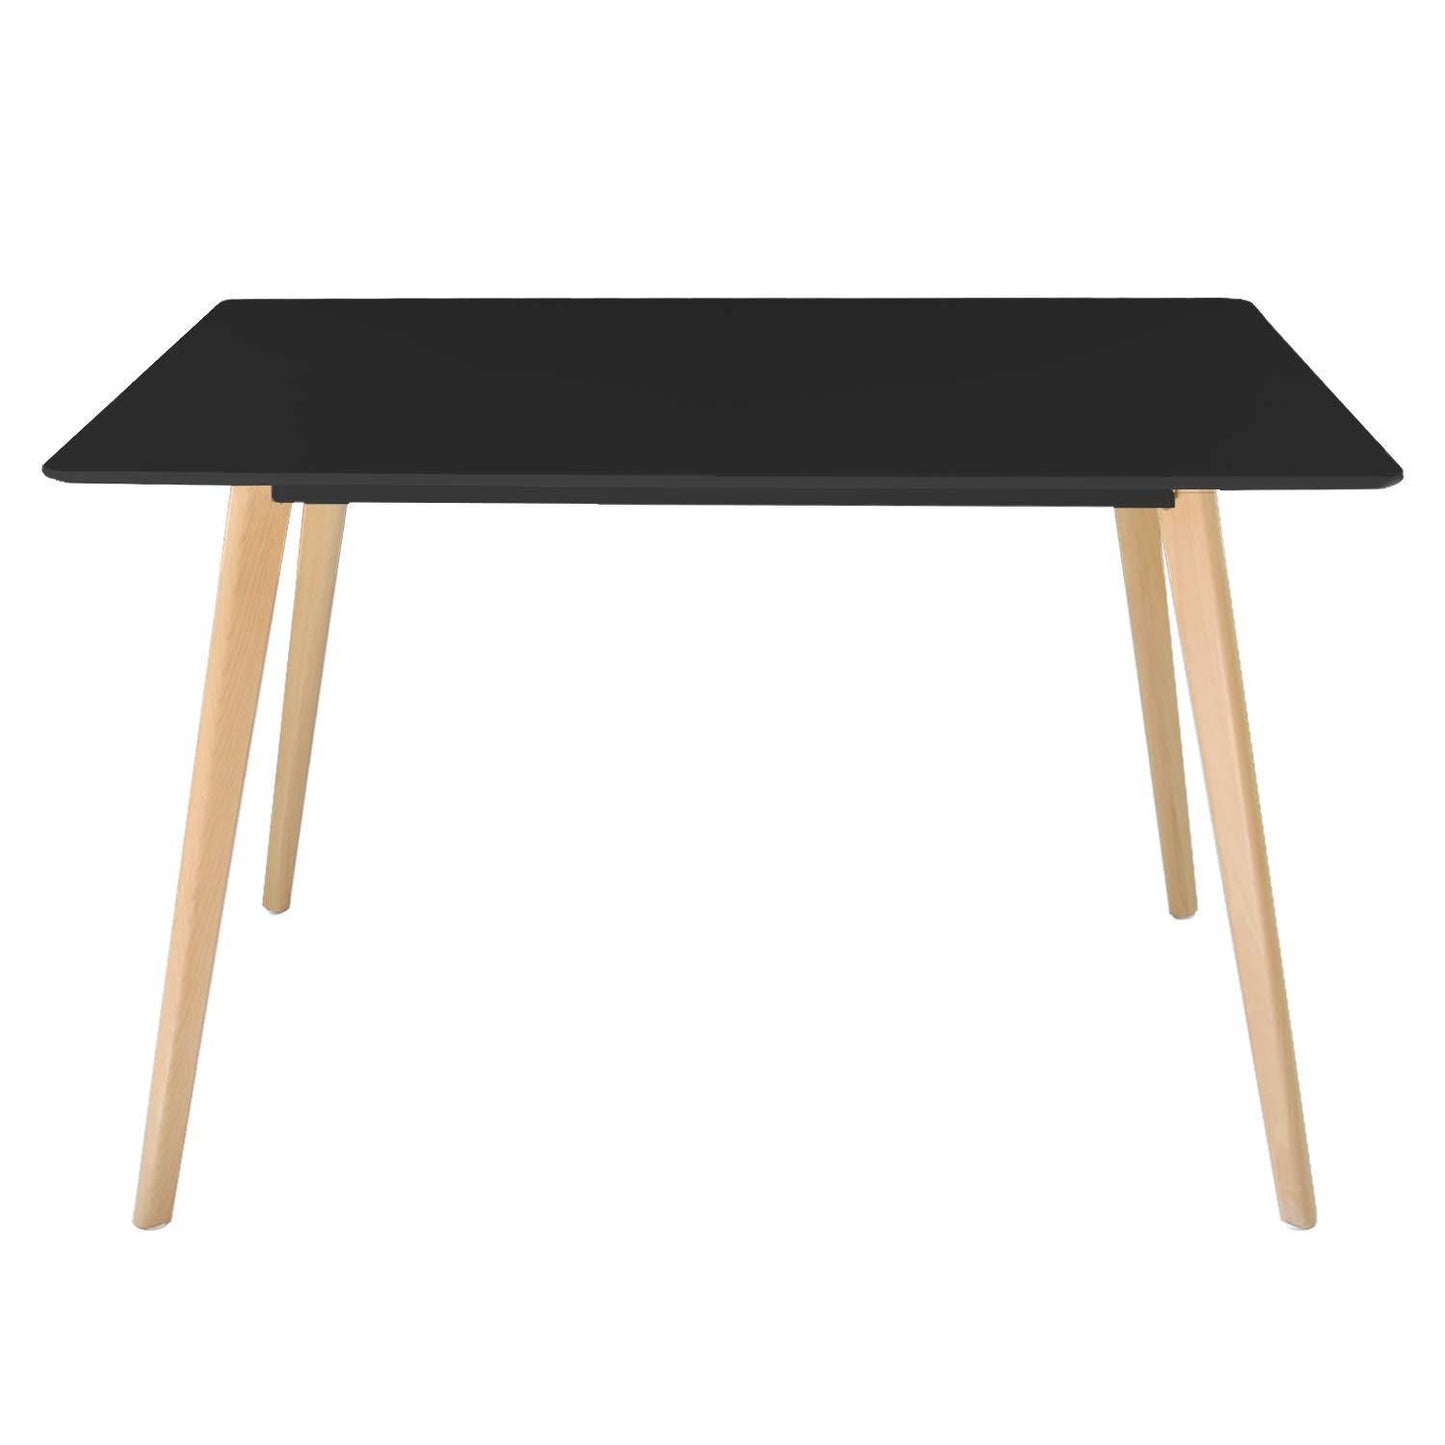 Buy now jerry maggie dinner table desk large family size with wood legs stone like polish surface multi purpose work study living room kitchen furniture decor modern fashion simple rectangle black